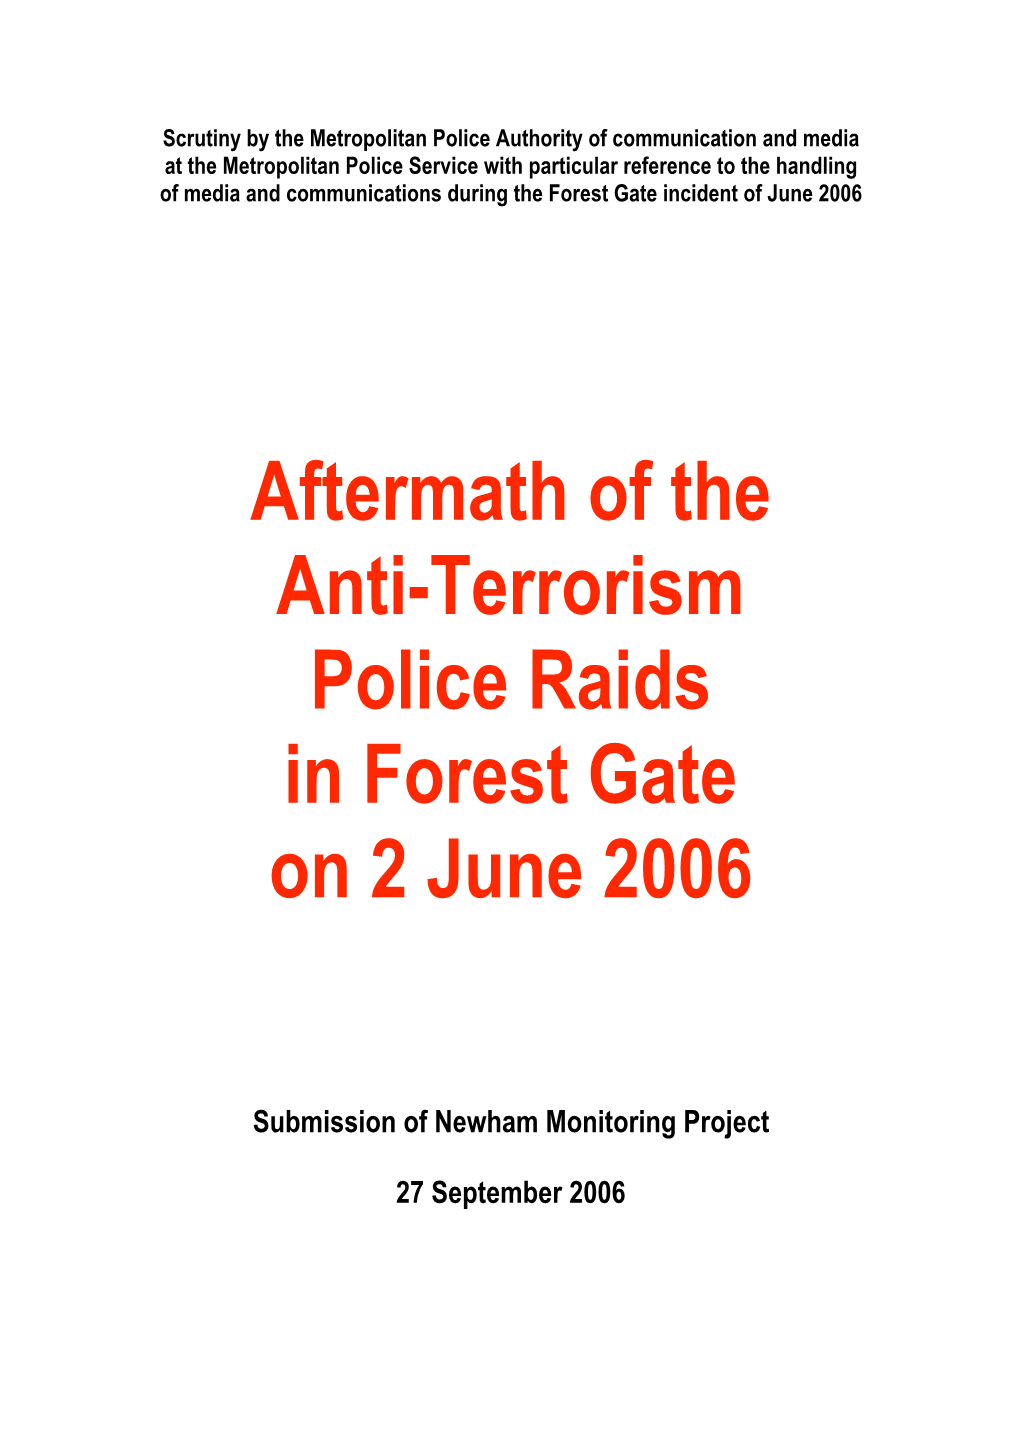 Aftermath of the Anti-Terrorism Police Raids in Forest Gate on 2 June 2006